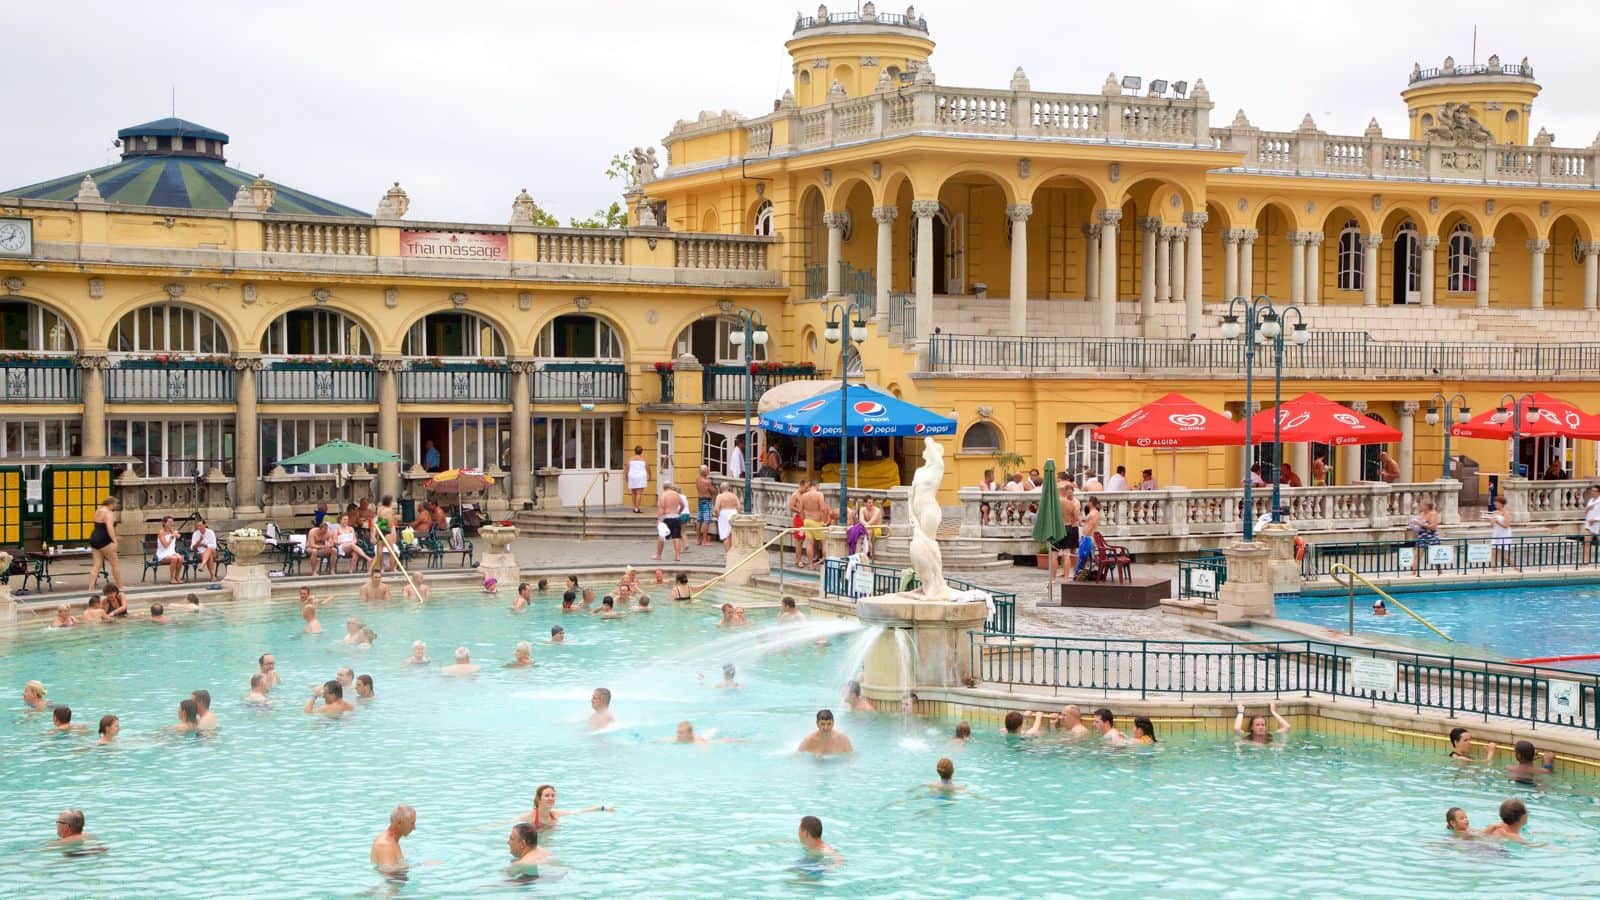 Budapest's thermal bath experience is an attraction you can't miss